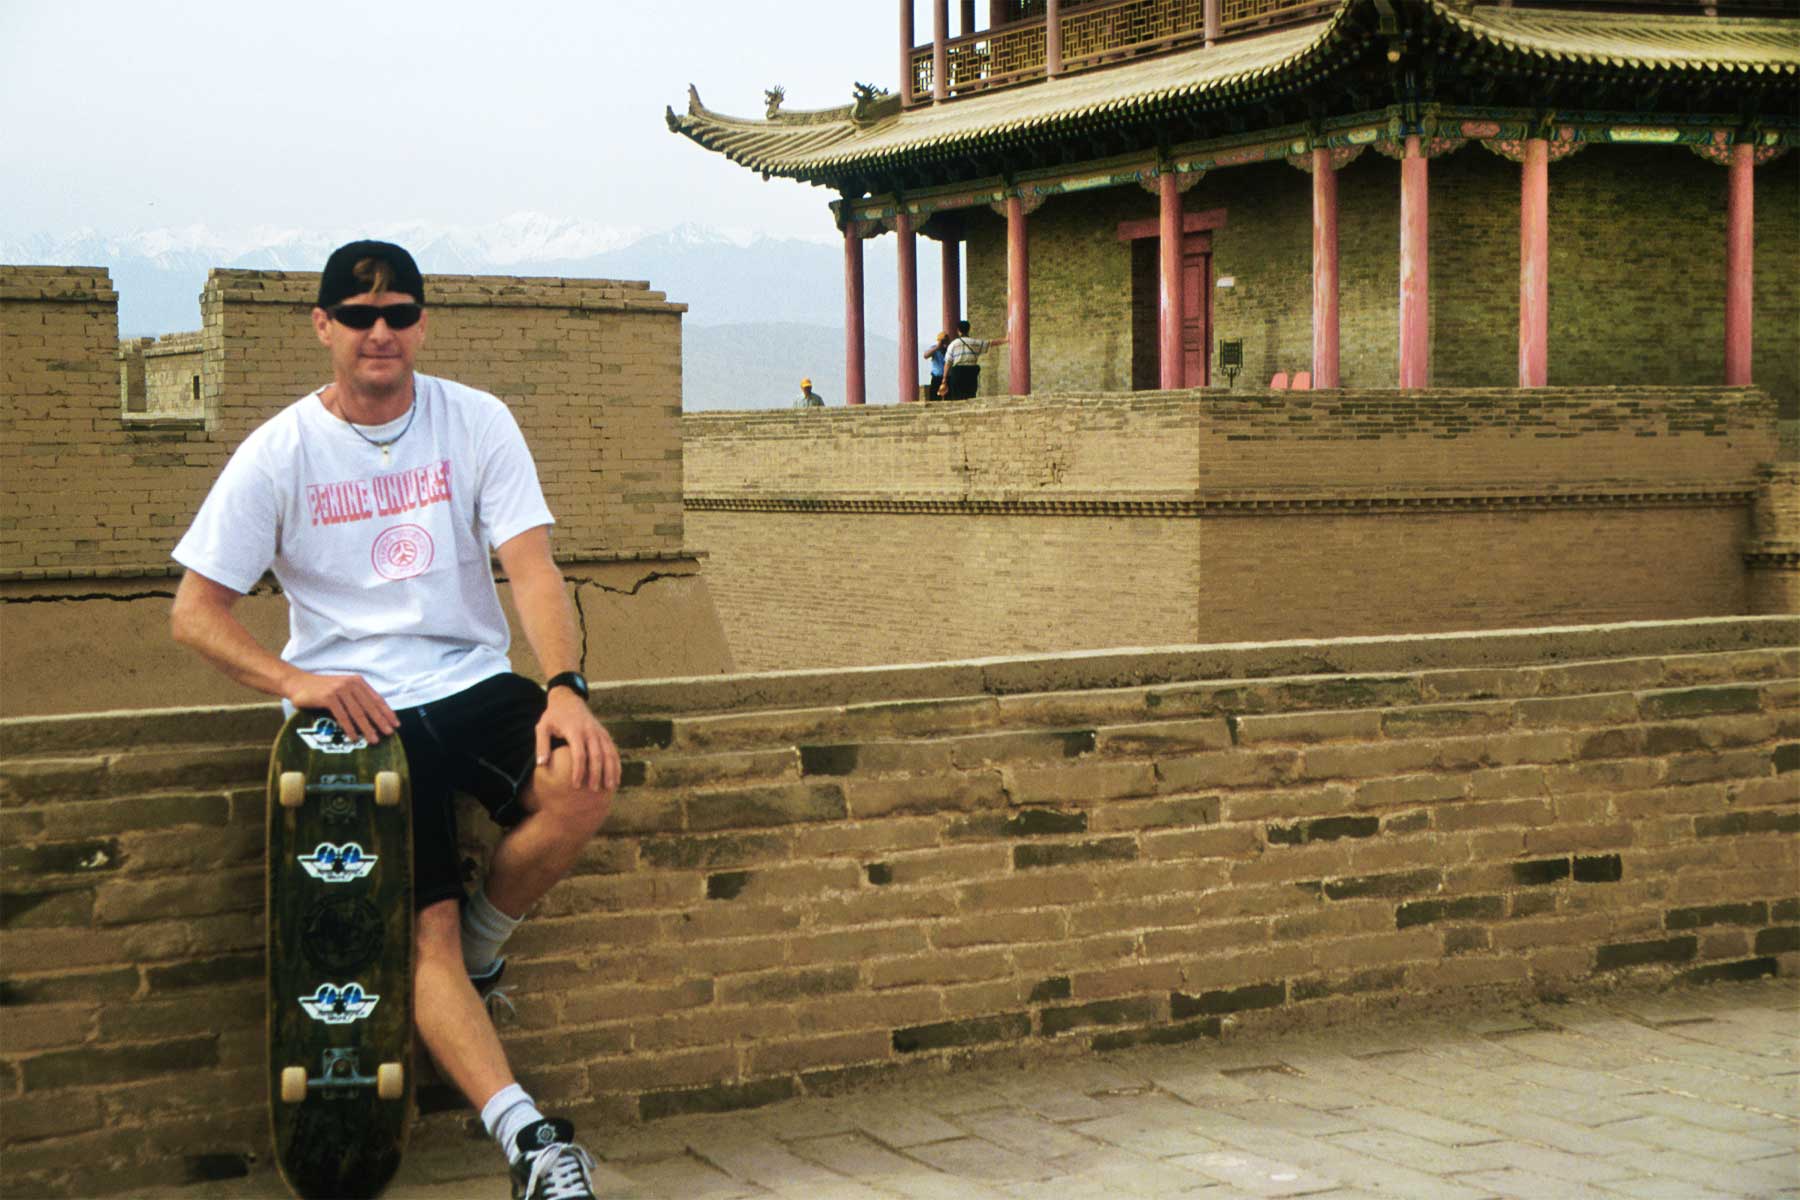 Surf Doctor Steven | Pekiing University China | Skateboarding the Great Wall of China | Jiayuguan fortress western garrison of the Ming Dynasty Great Wall